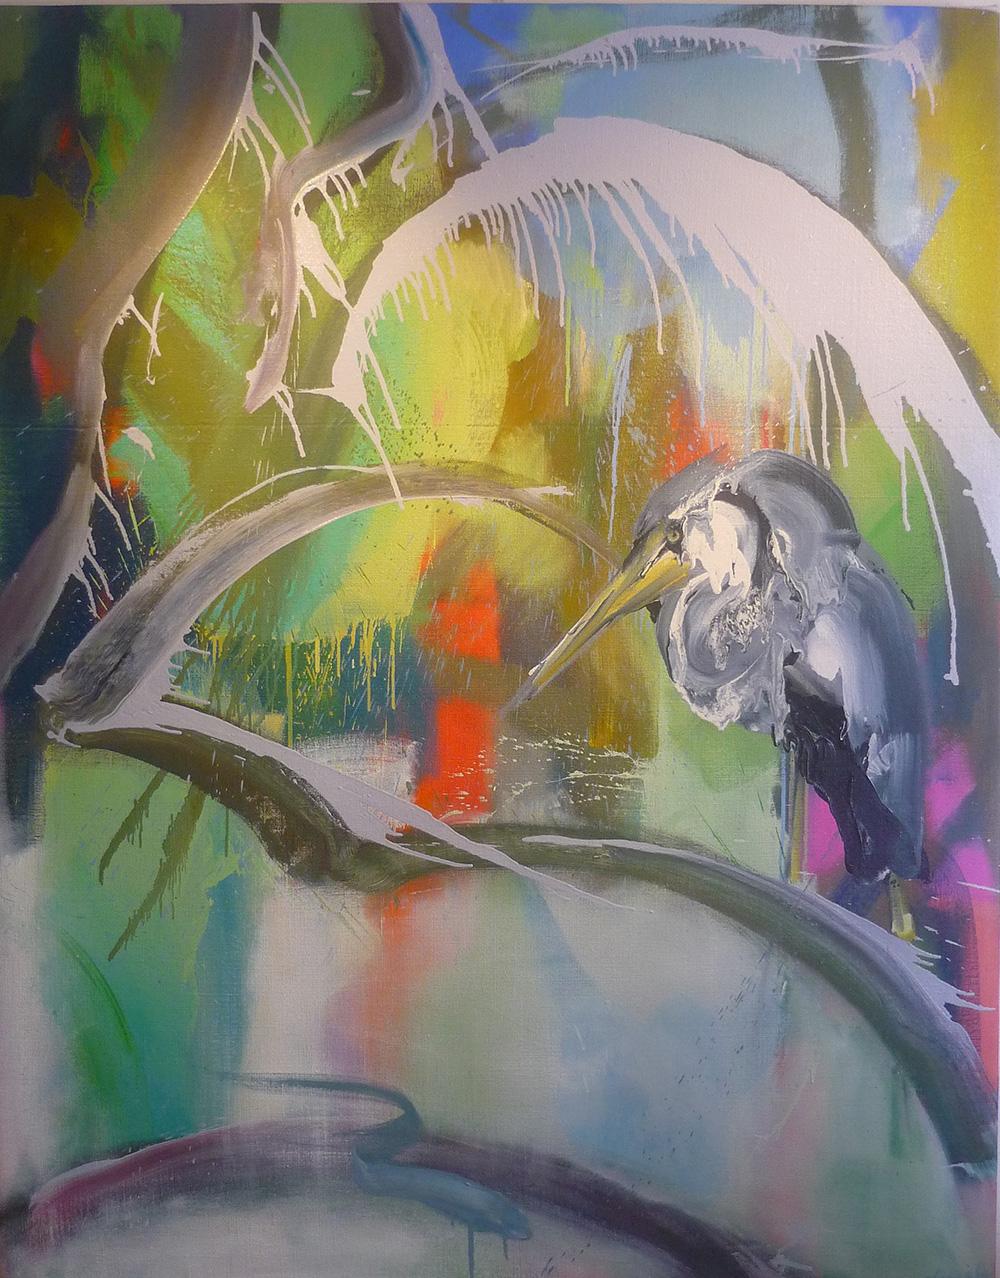 Indulto by Christophe Dupety - Contemporary painting, bright colors, bird